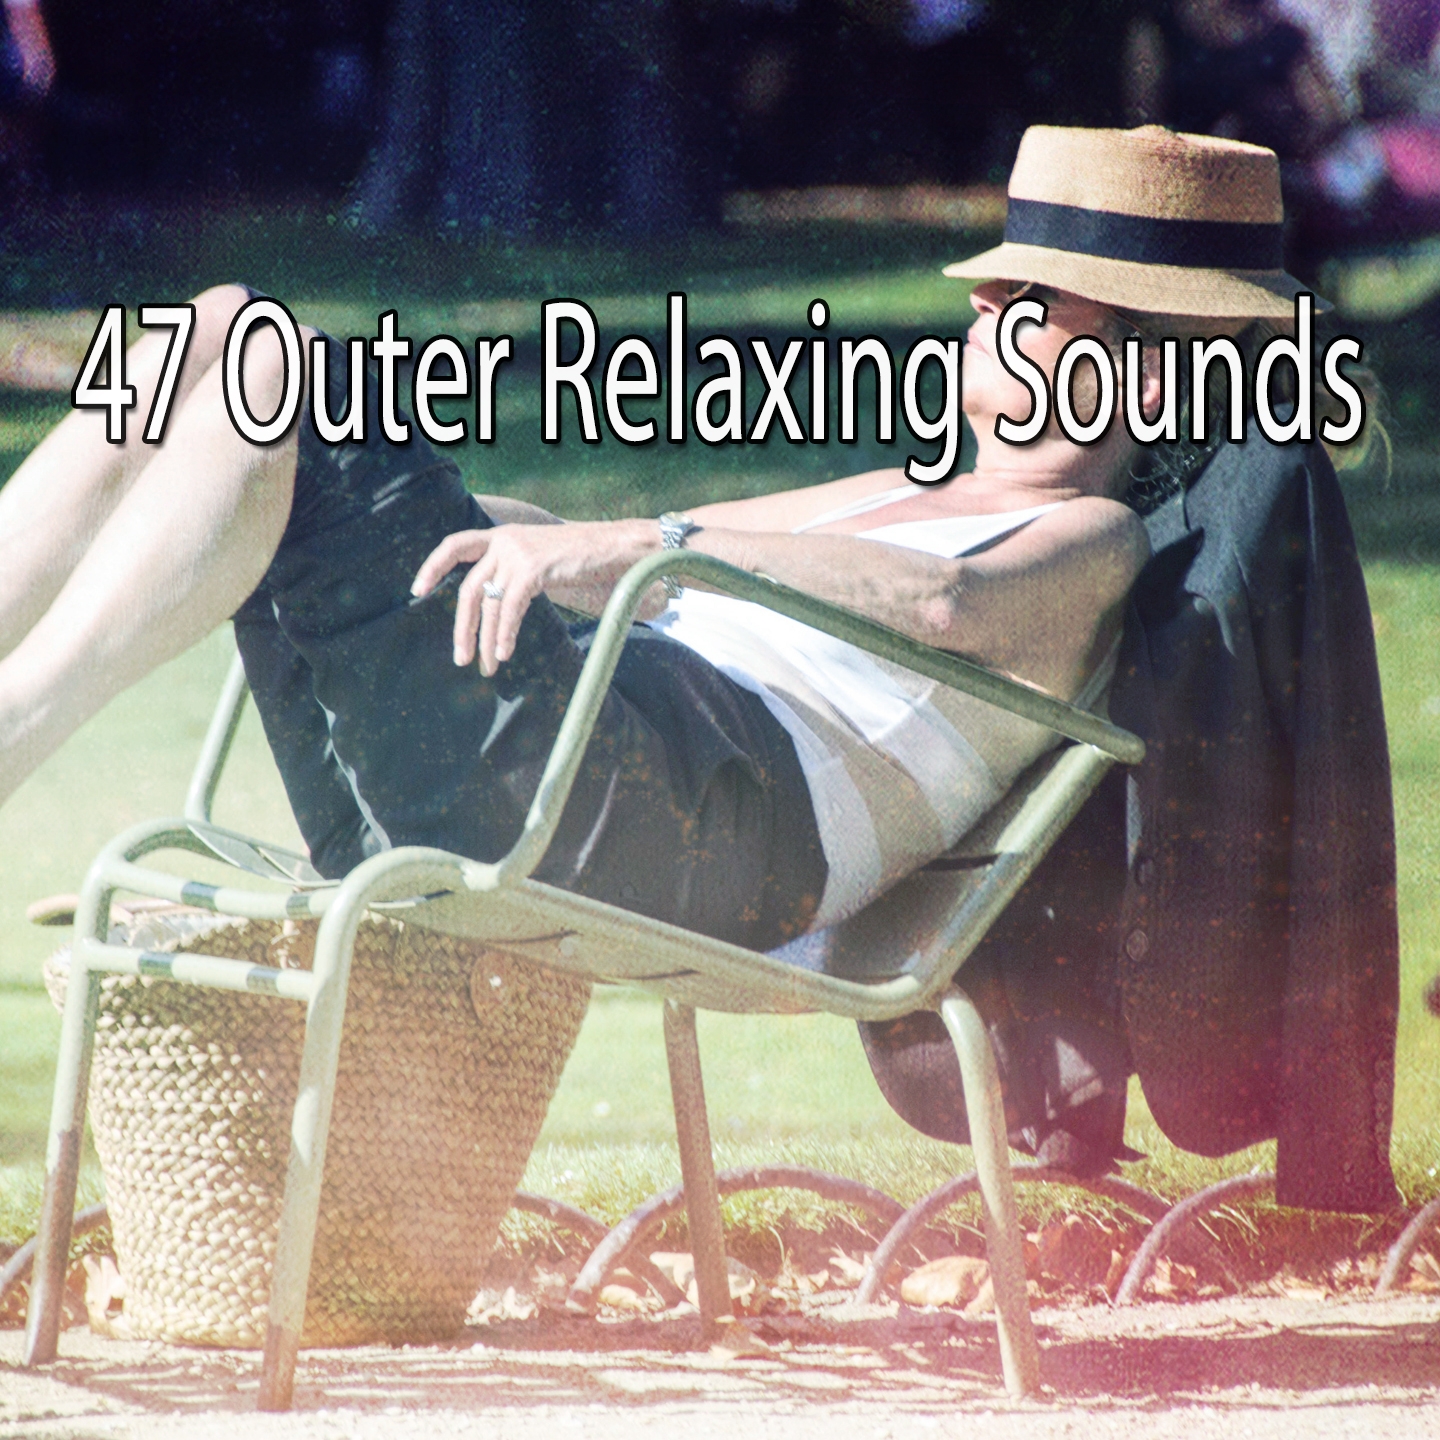 47 Outer Relaxing Sounds